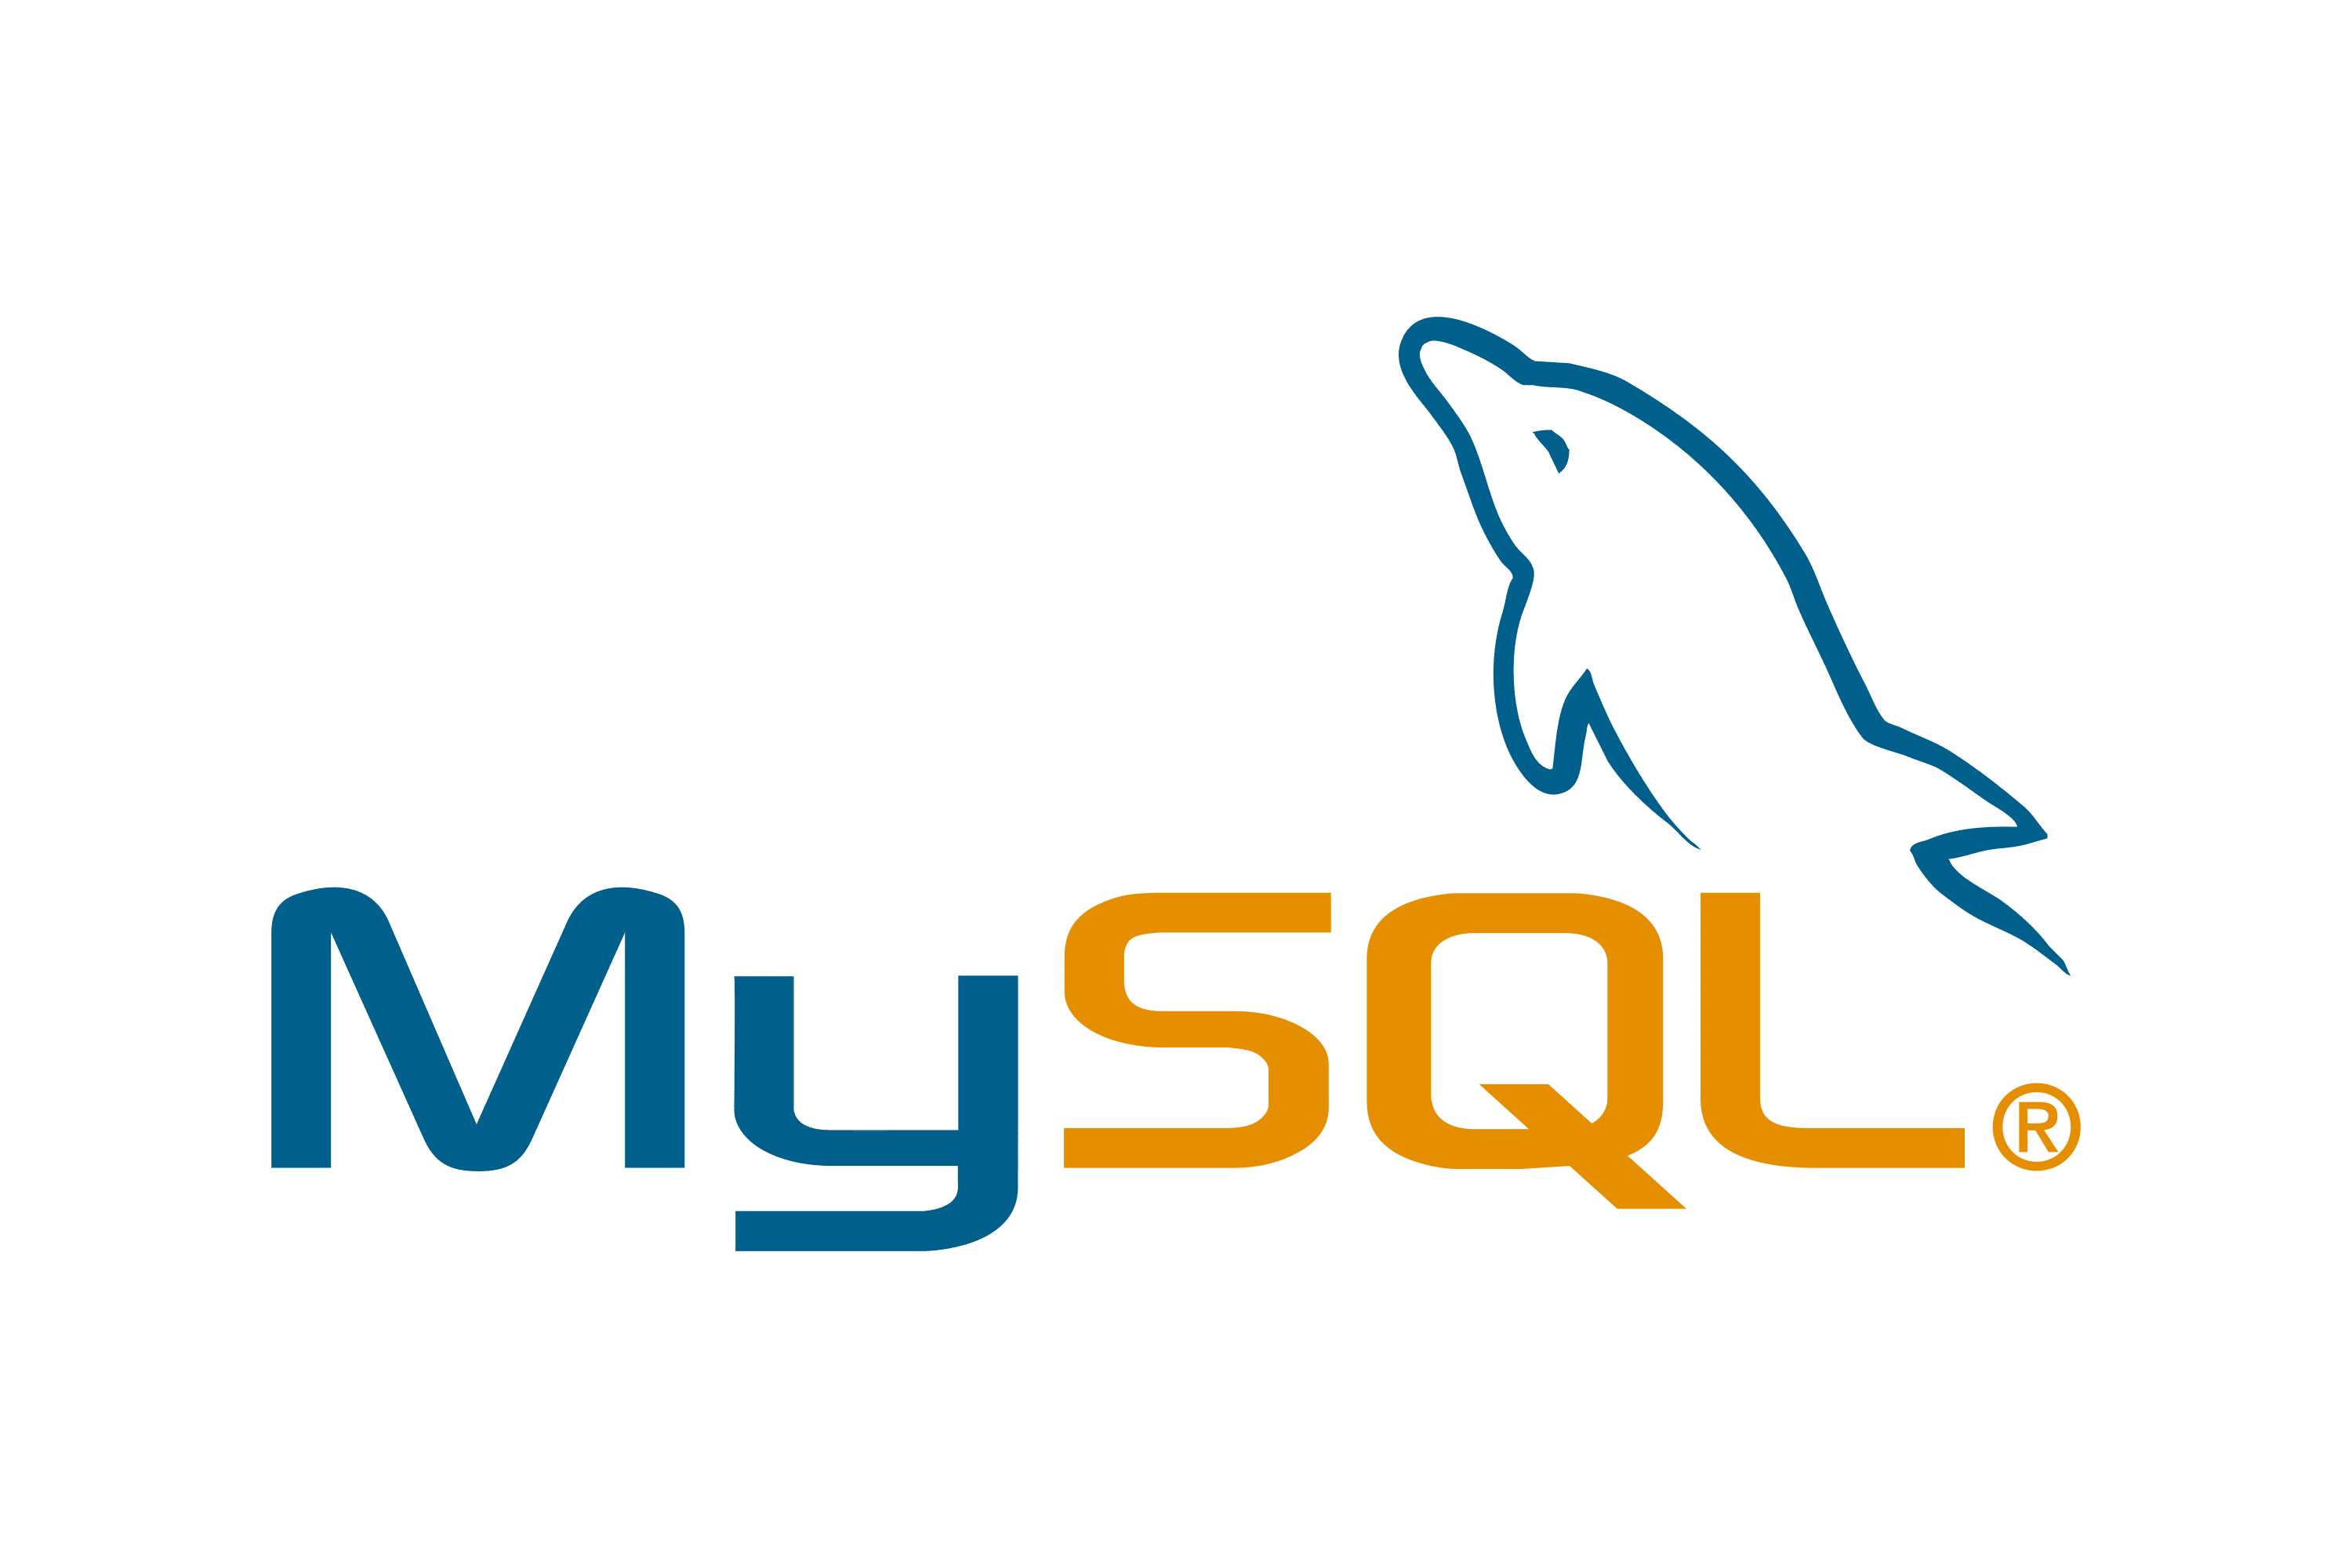 The MySQL logo, showing the text below a tilted, stylized blue dolphin body.